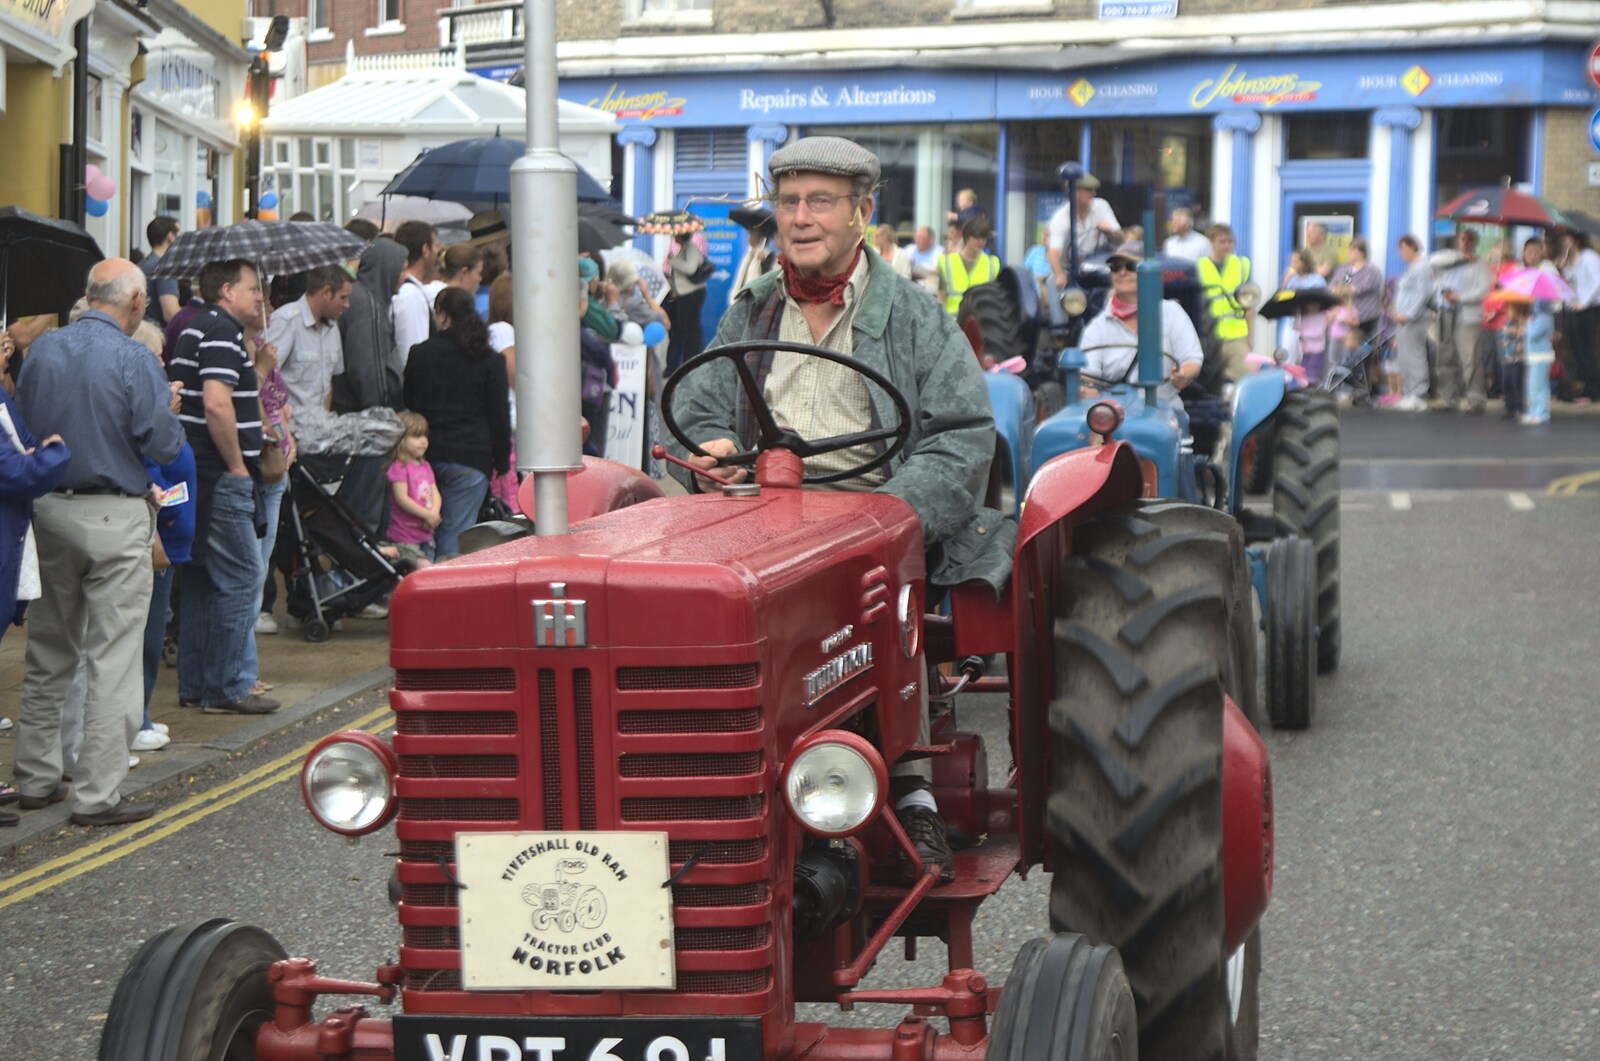 Another vintage tractor from Diss Carnival Procession, Diss, Norfolk - 21st June 2009